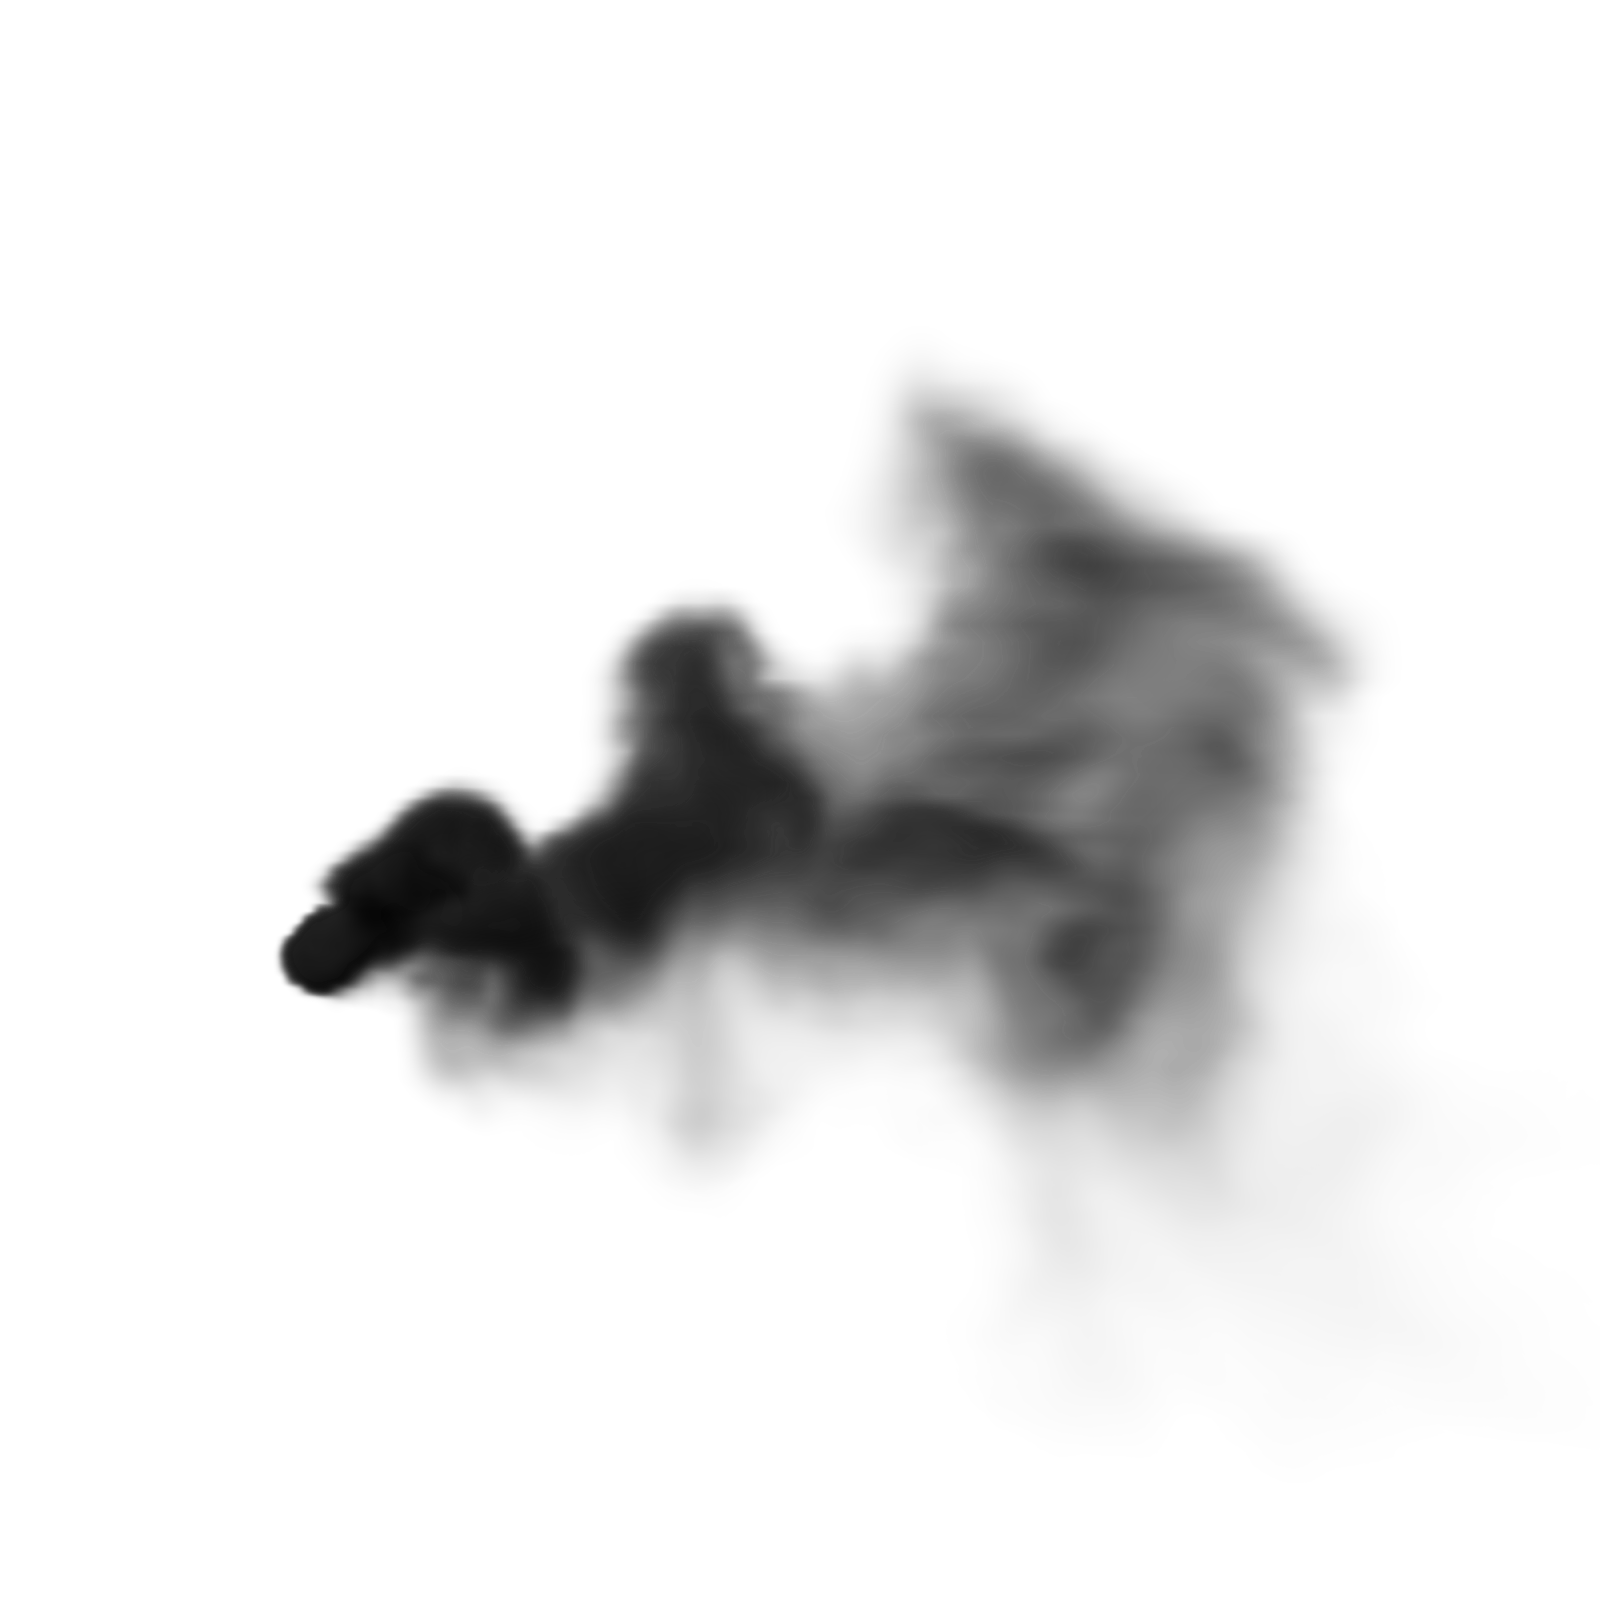 Fire and new by. Car smoke png